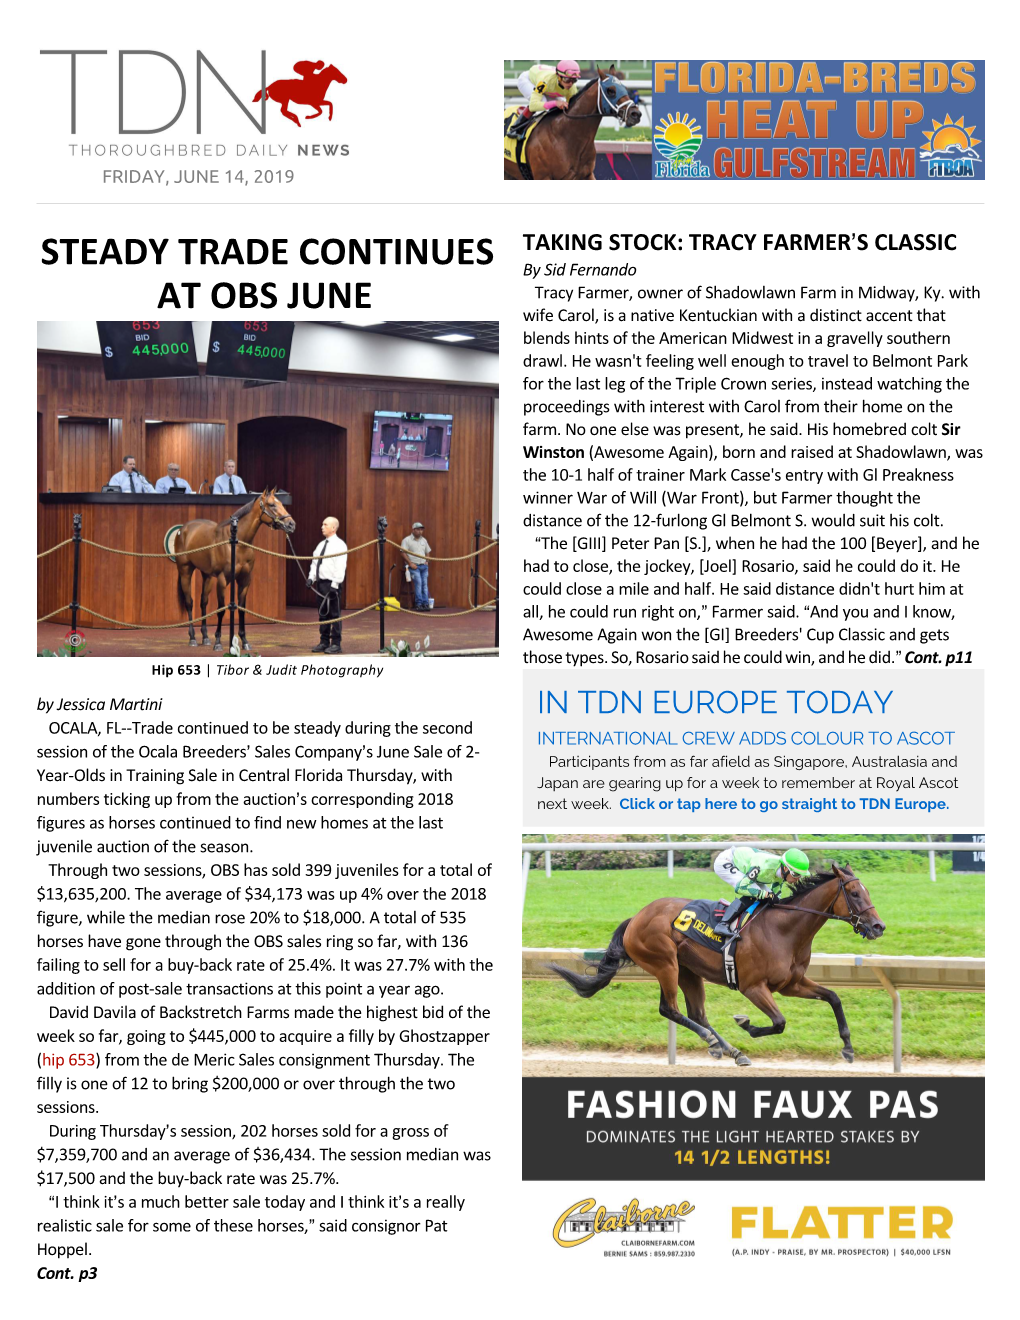 Steady Trade Continues at Obs June